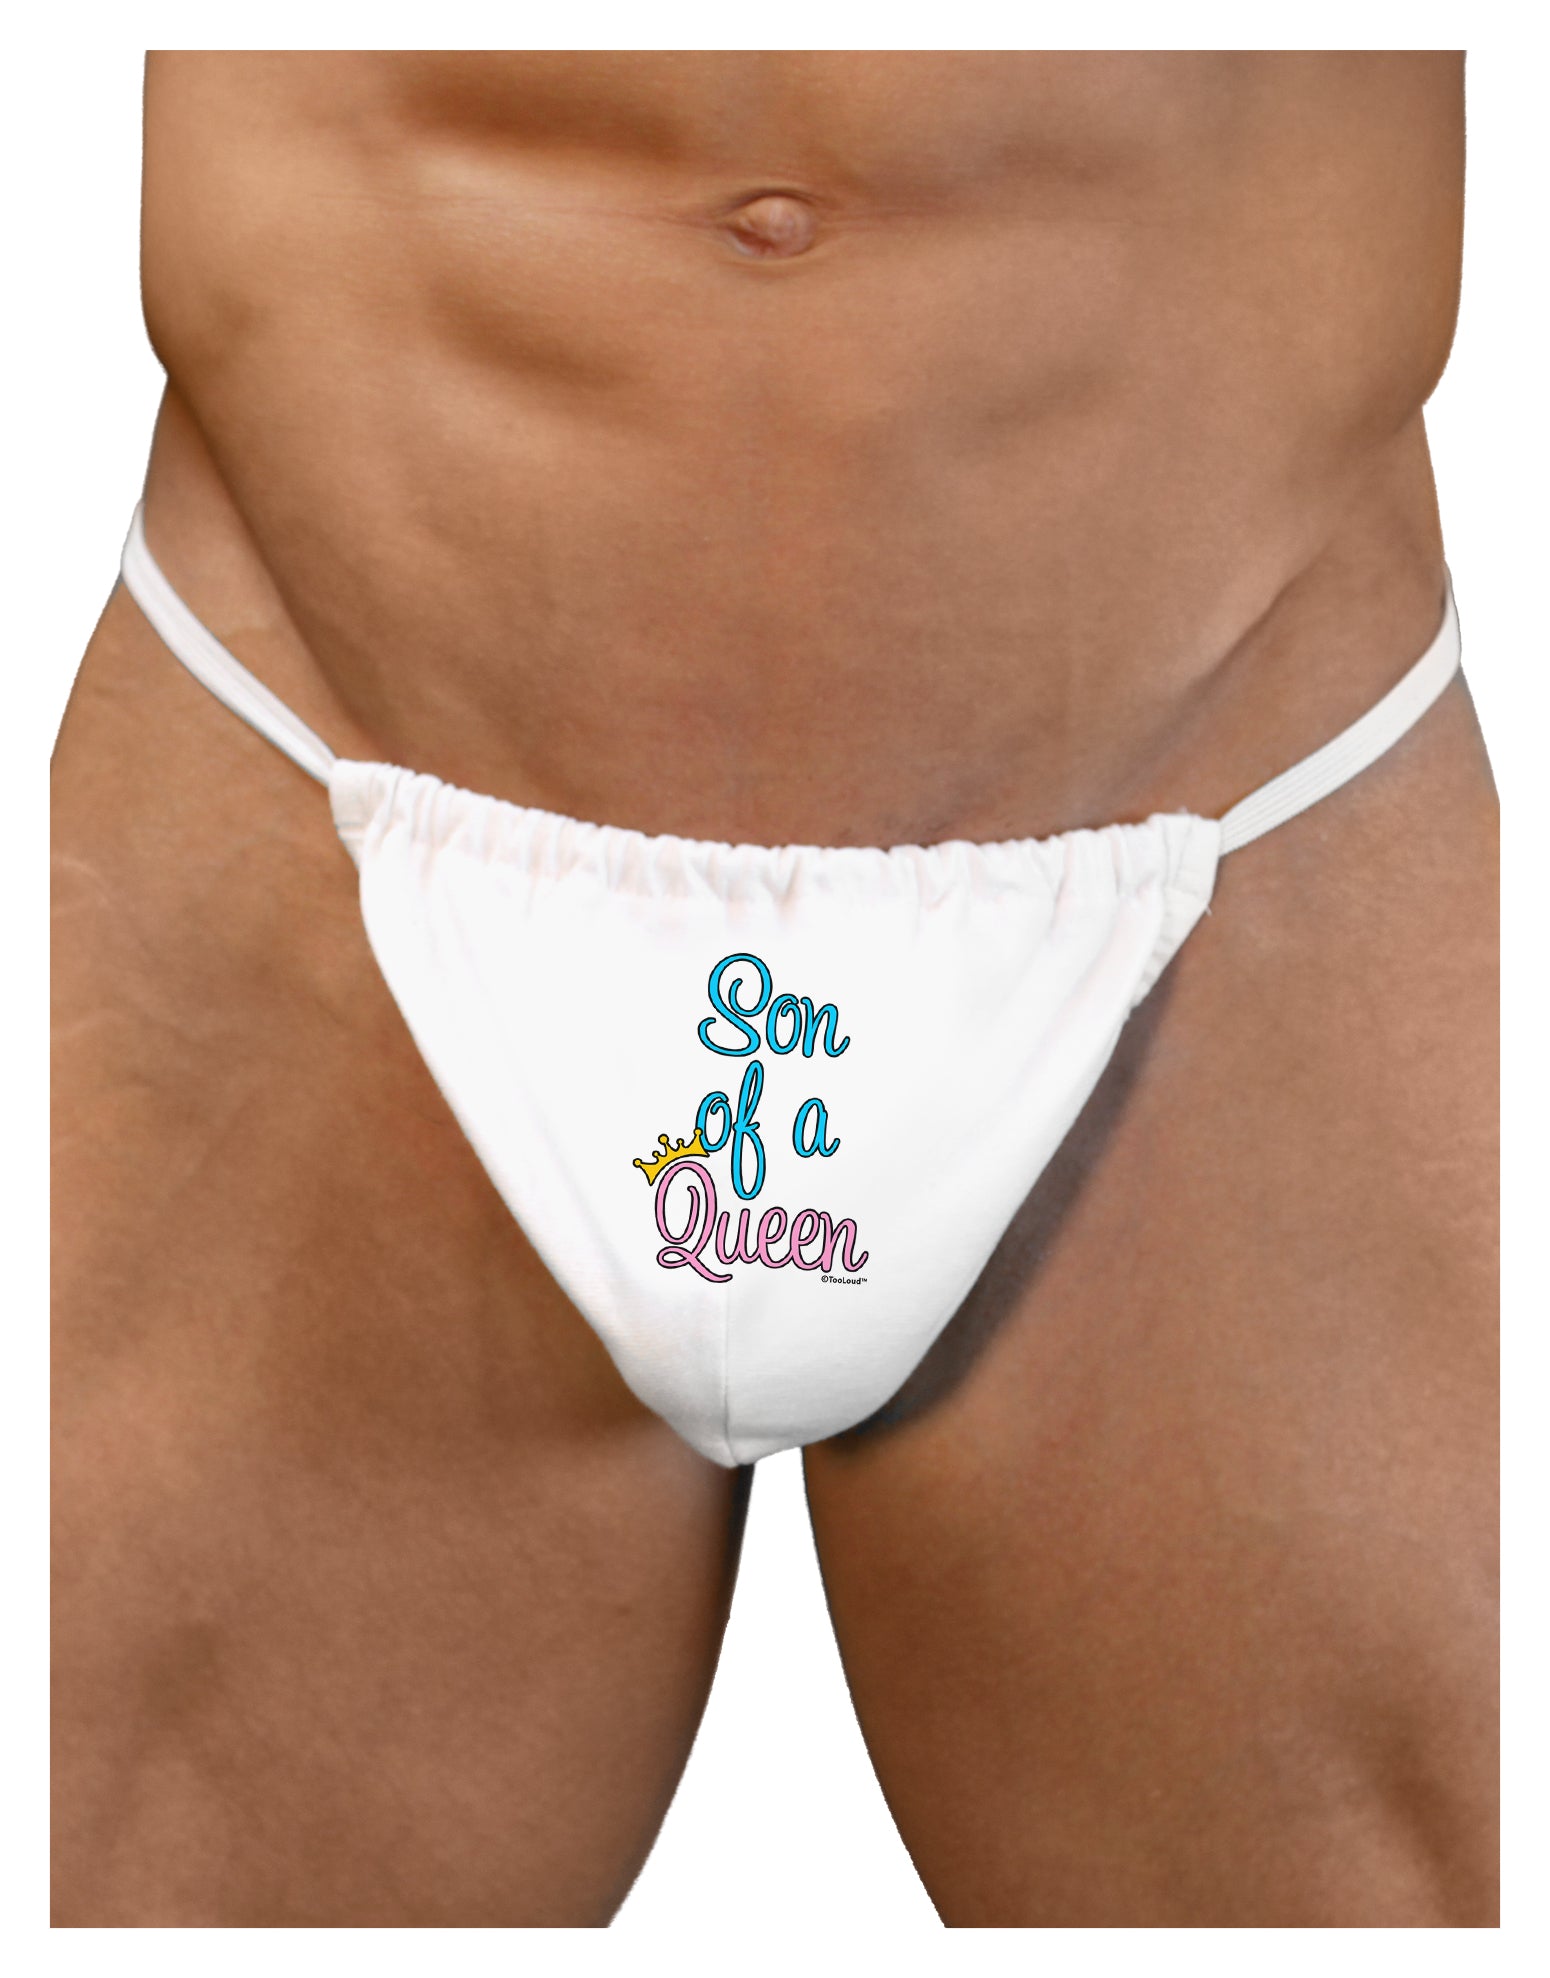 Son of a Queen - Matching Mom and Son Design Mens G-String